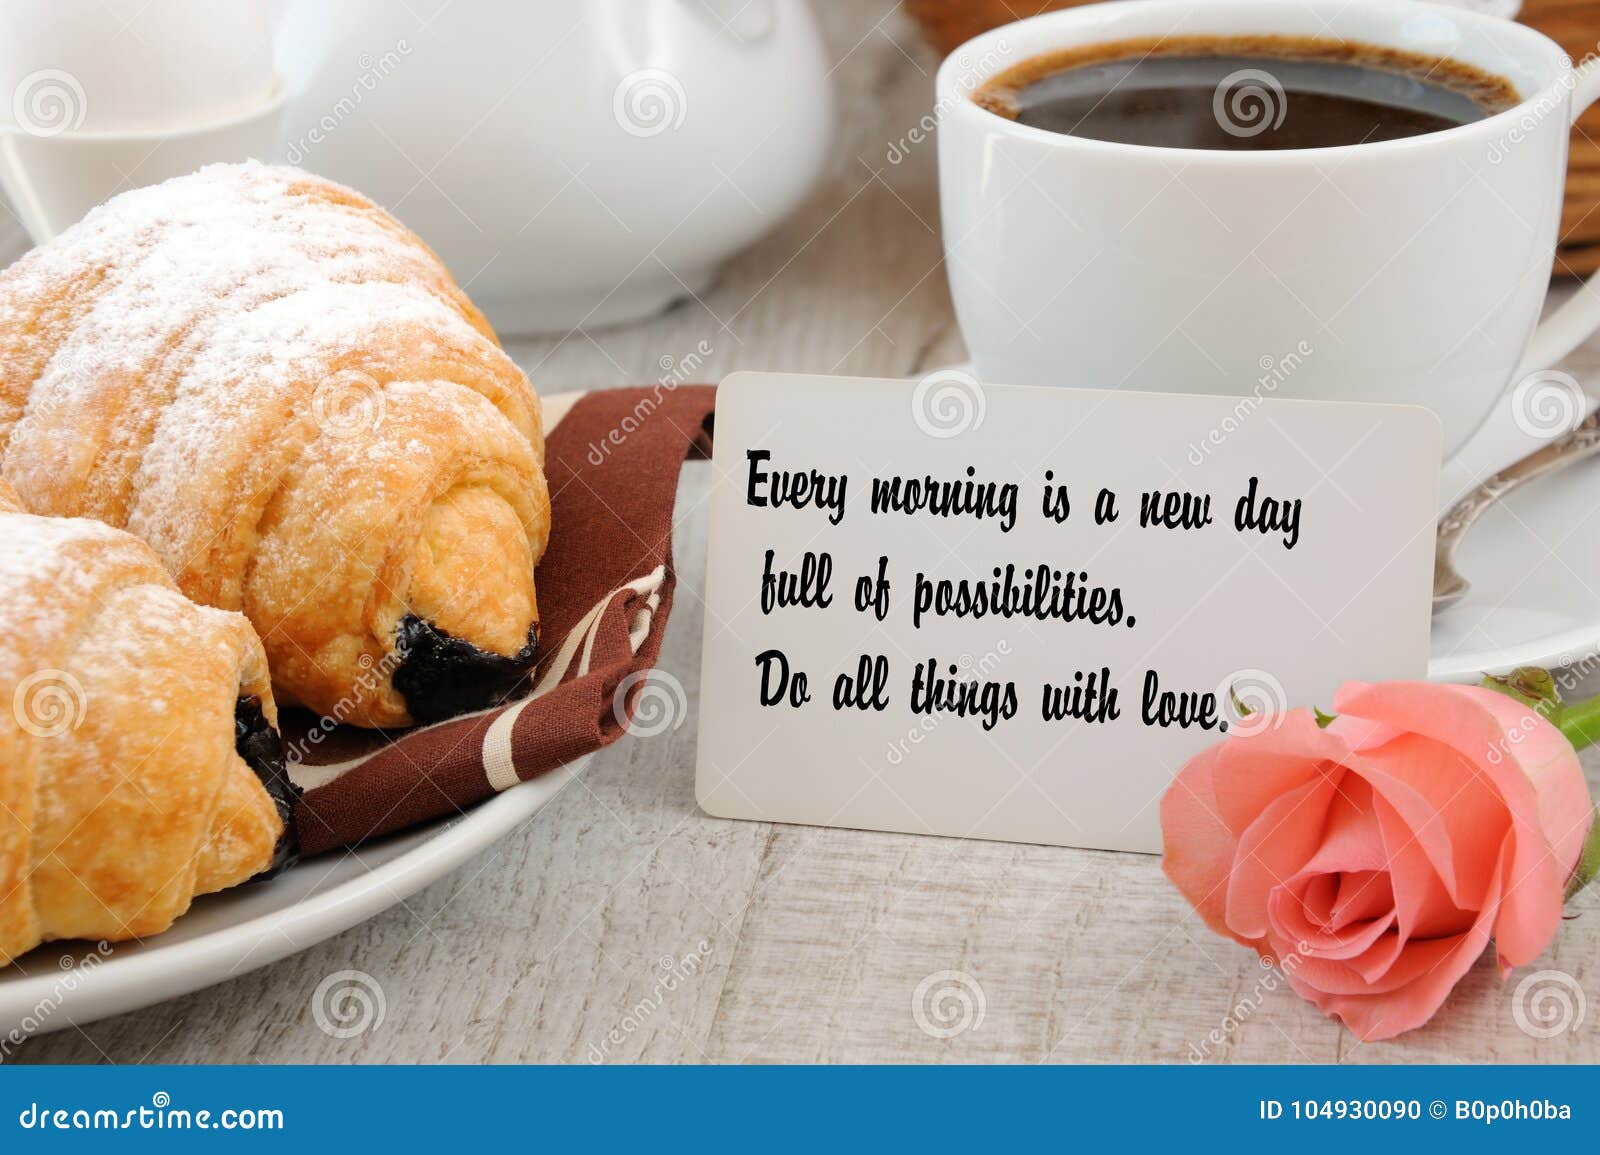 Breakfast with Motivational Quote Stock Photo - Image of food, concept